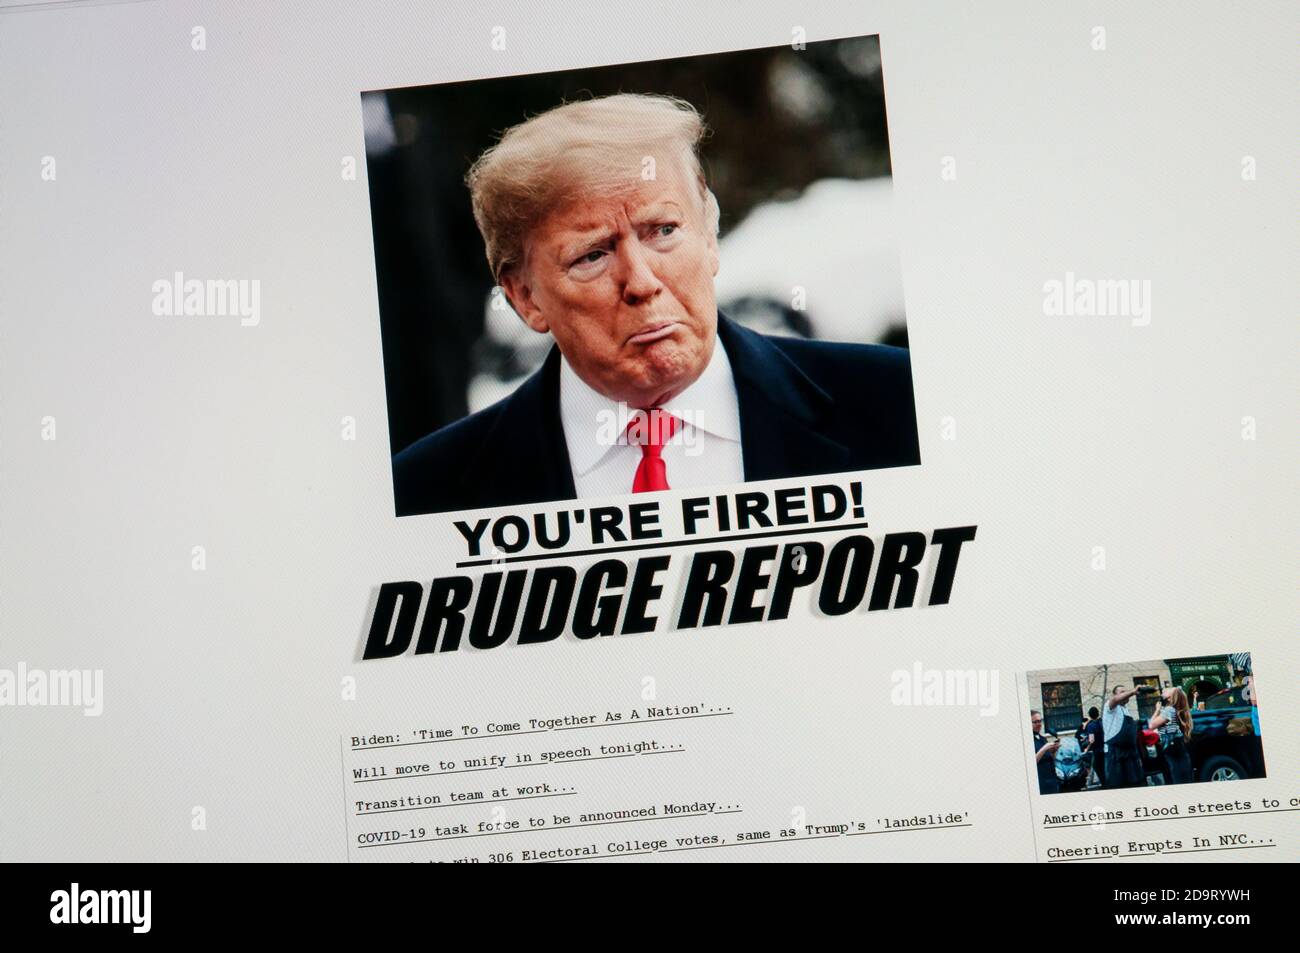 07 Nov 2020. Home page of The Drudge Report website as Donald Trump loses the American 2020 presidential election. Credit sjscreens/Alamy. Stock Photo